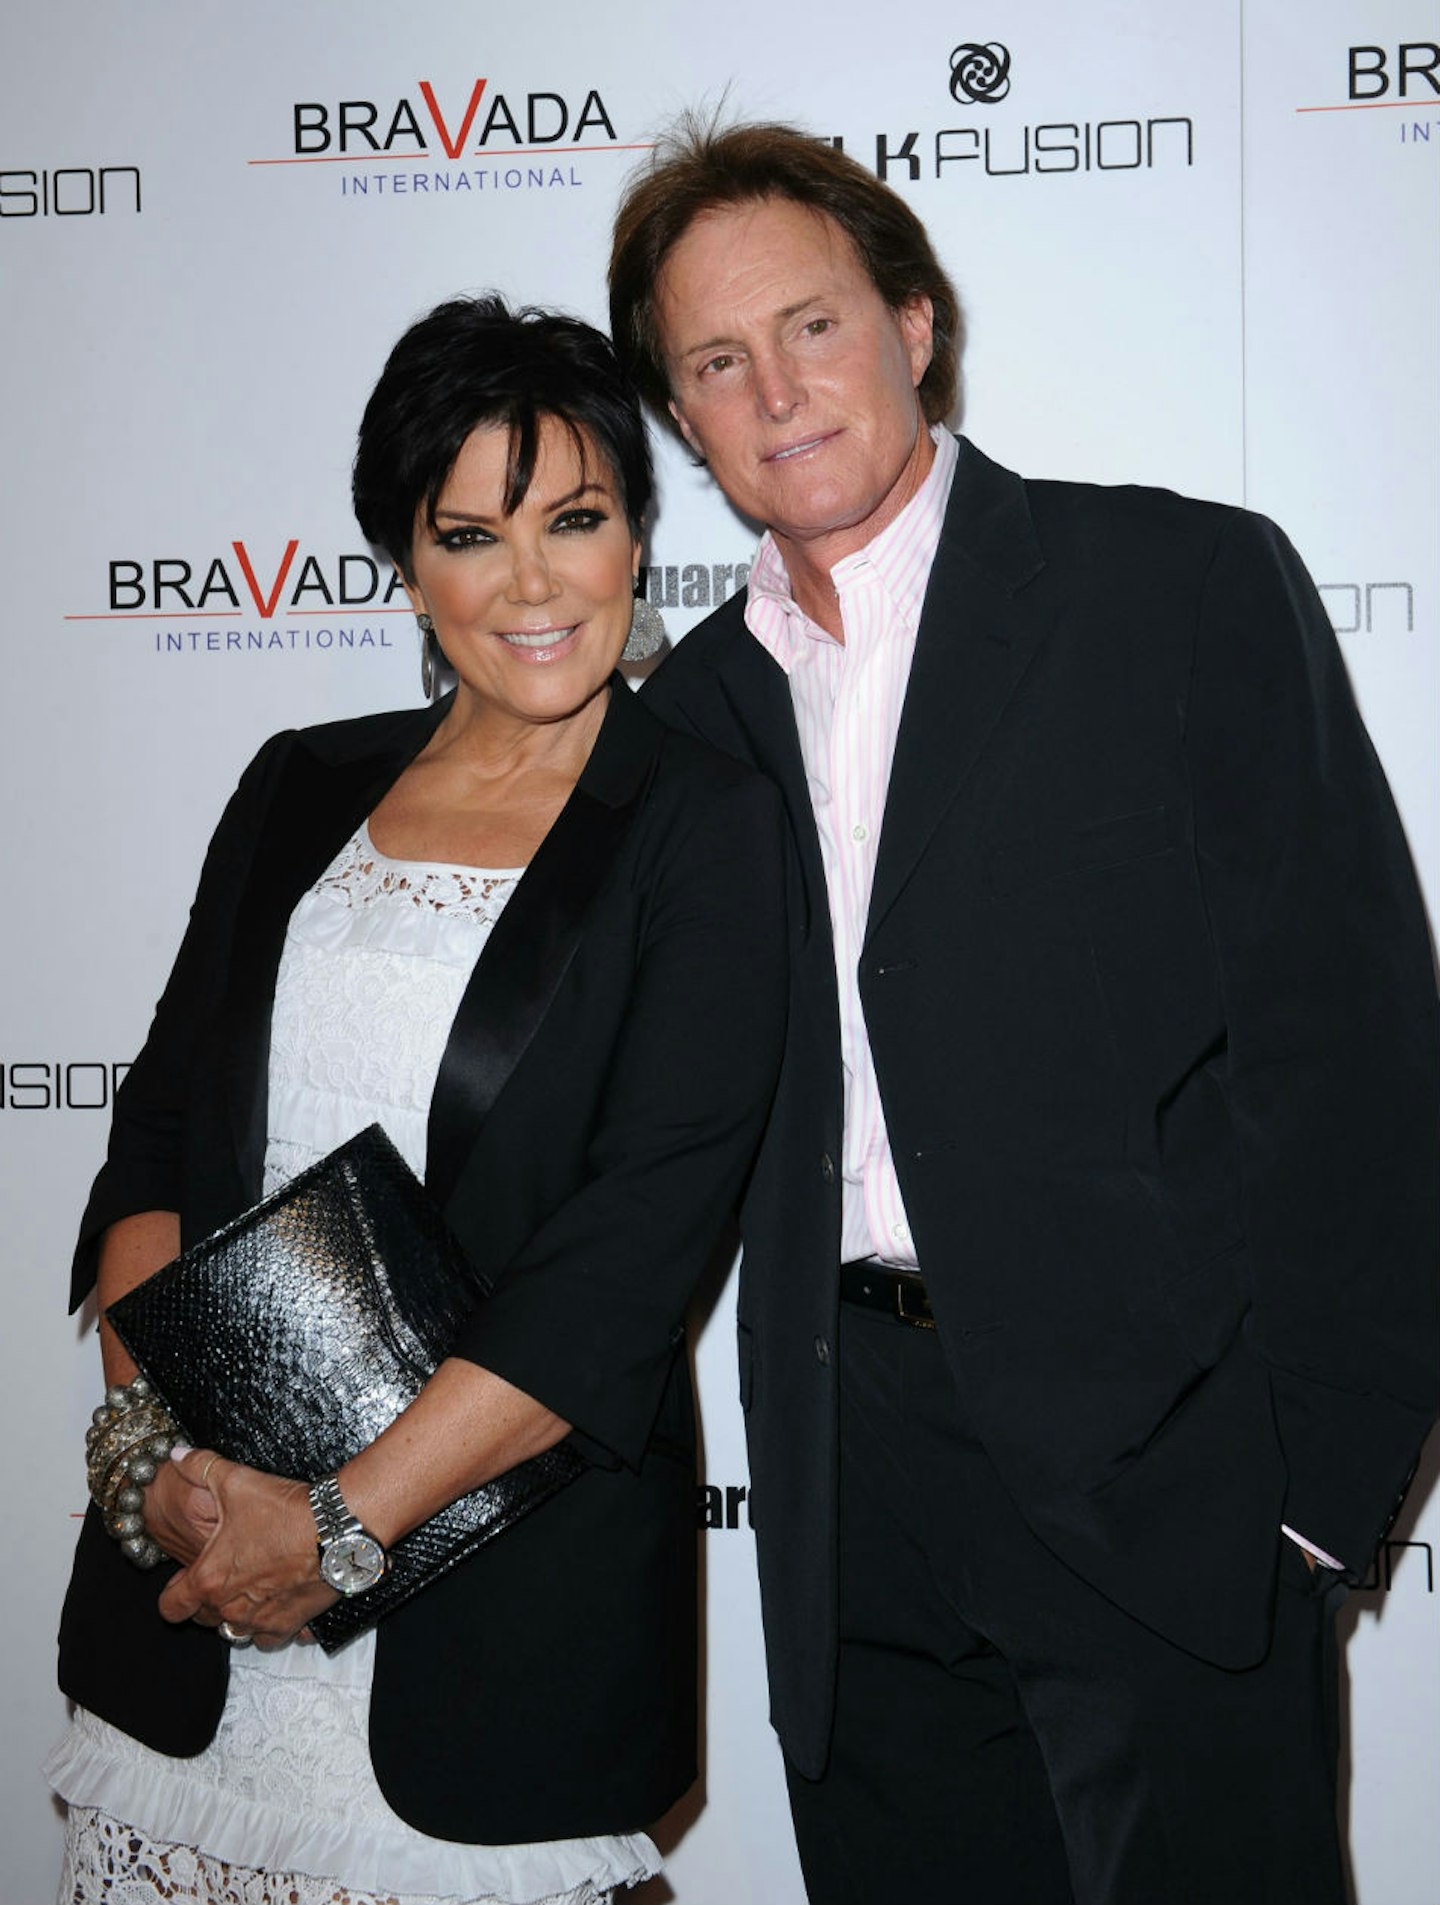 Bruce with his then wife, Kris Jenner, in 2013.